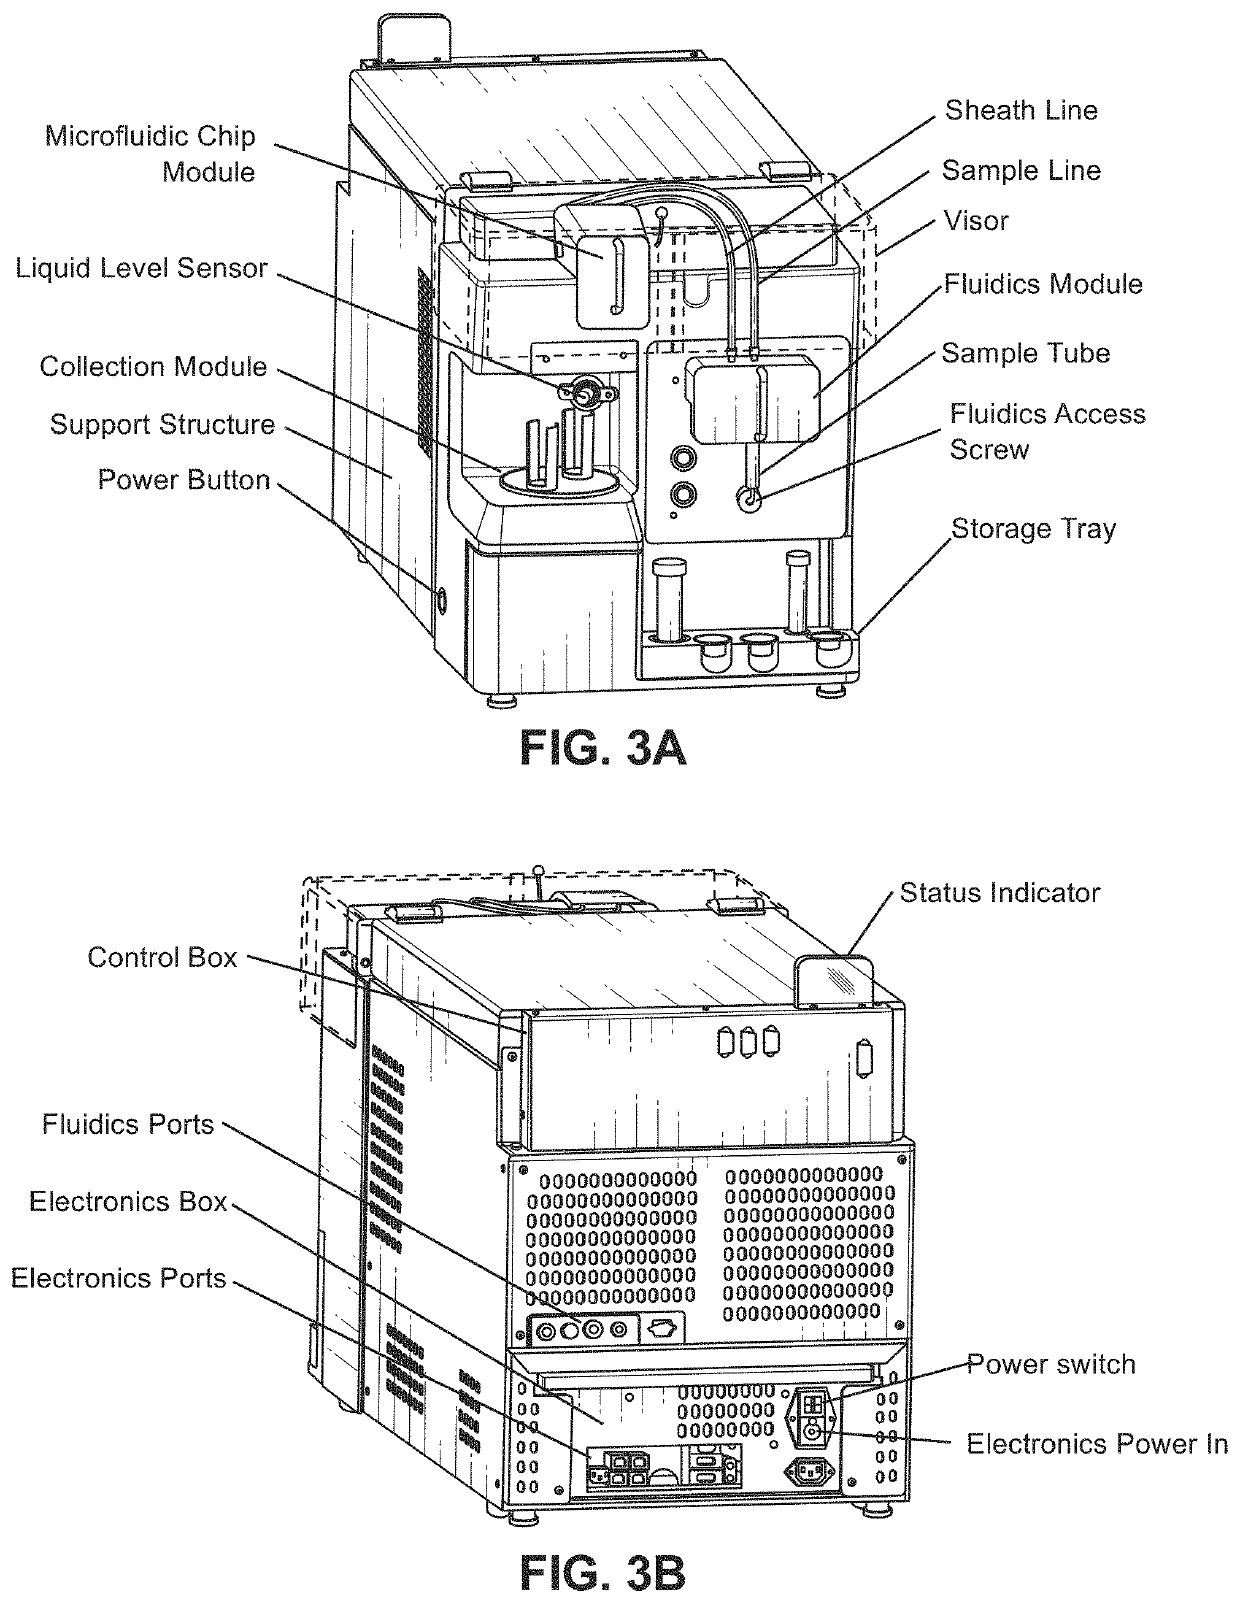 Modular flow cytometry systems and methods of processing samples